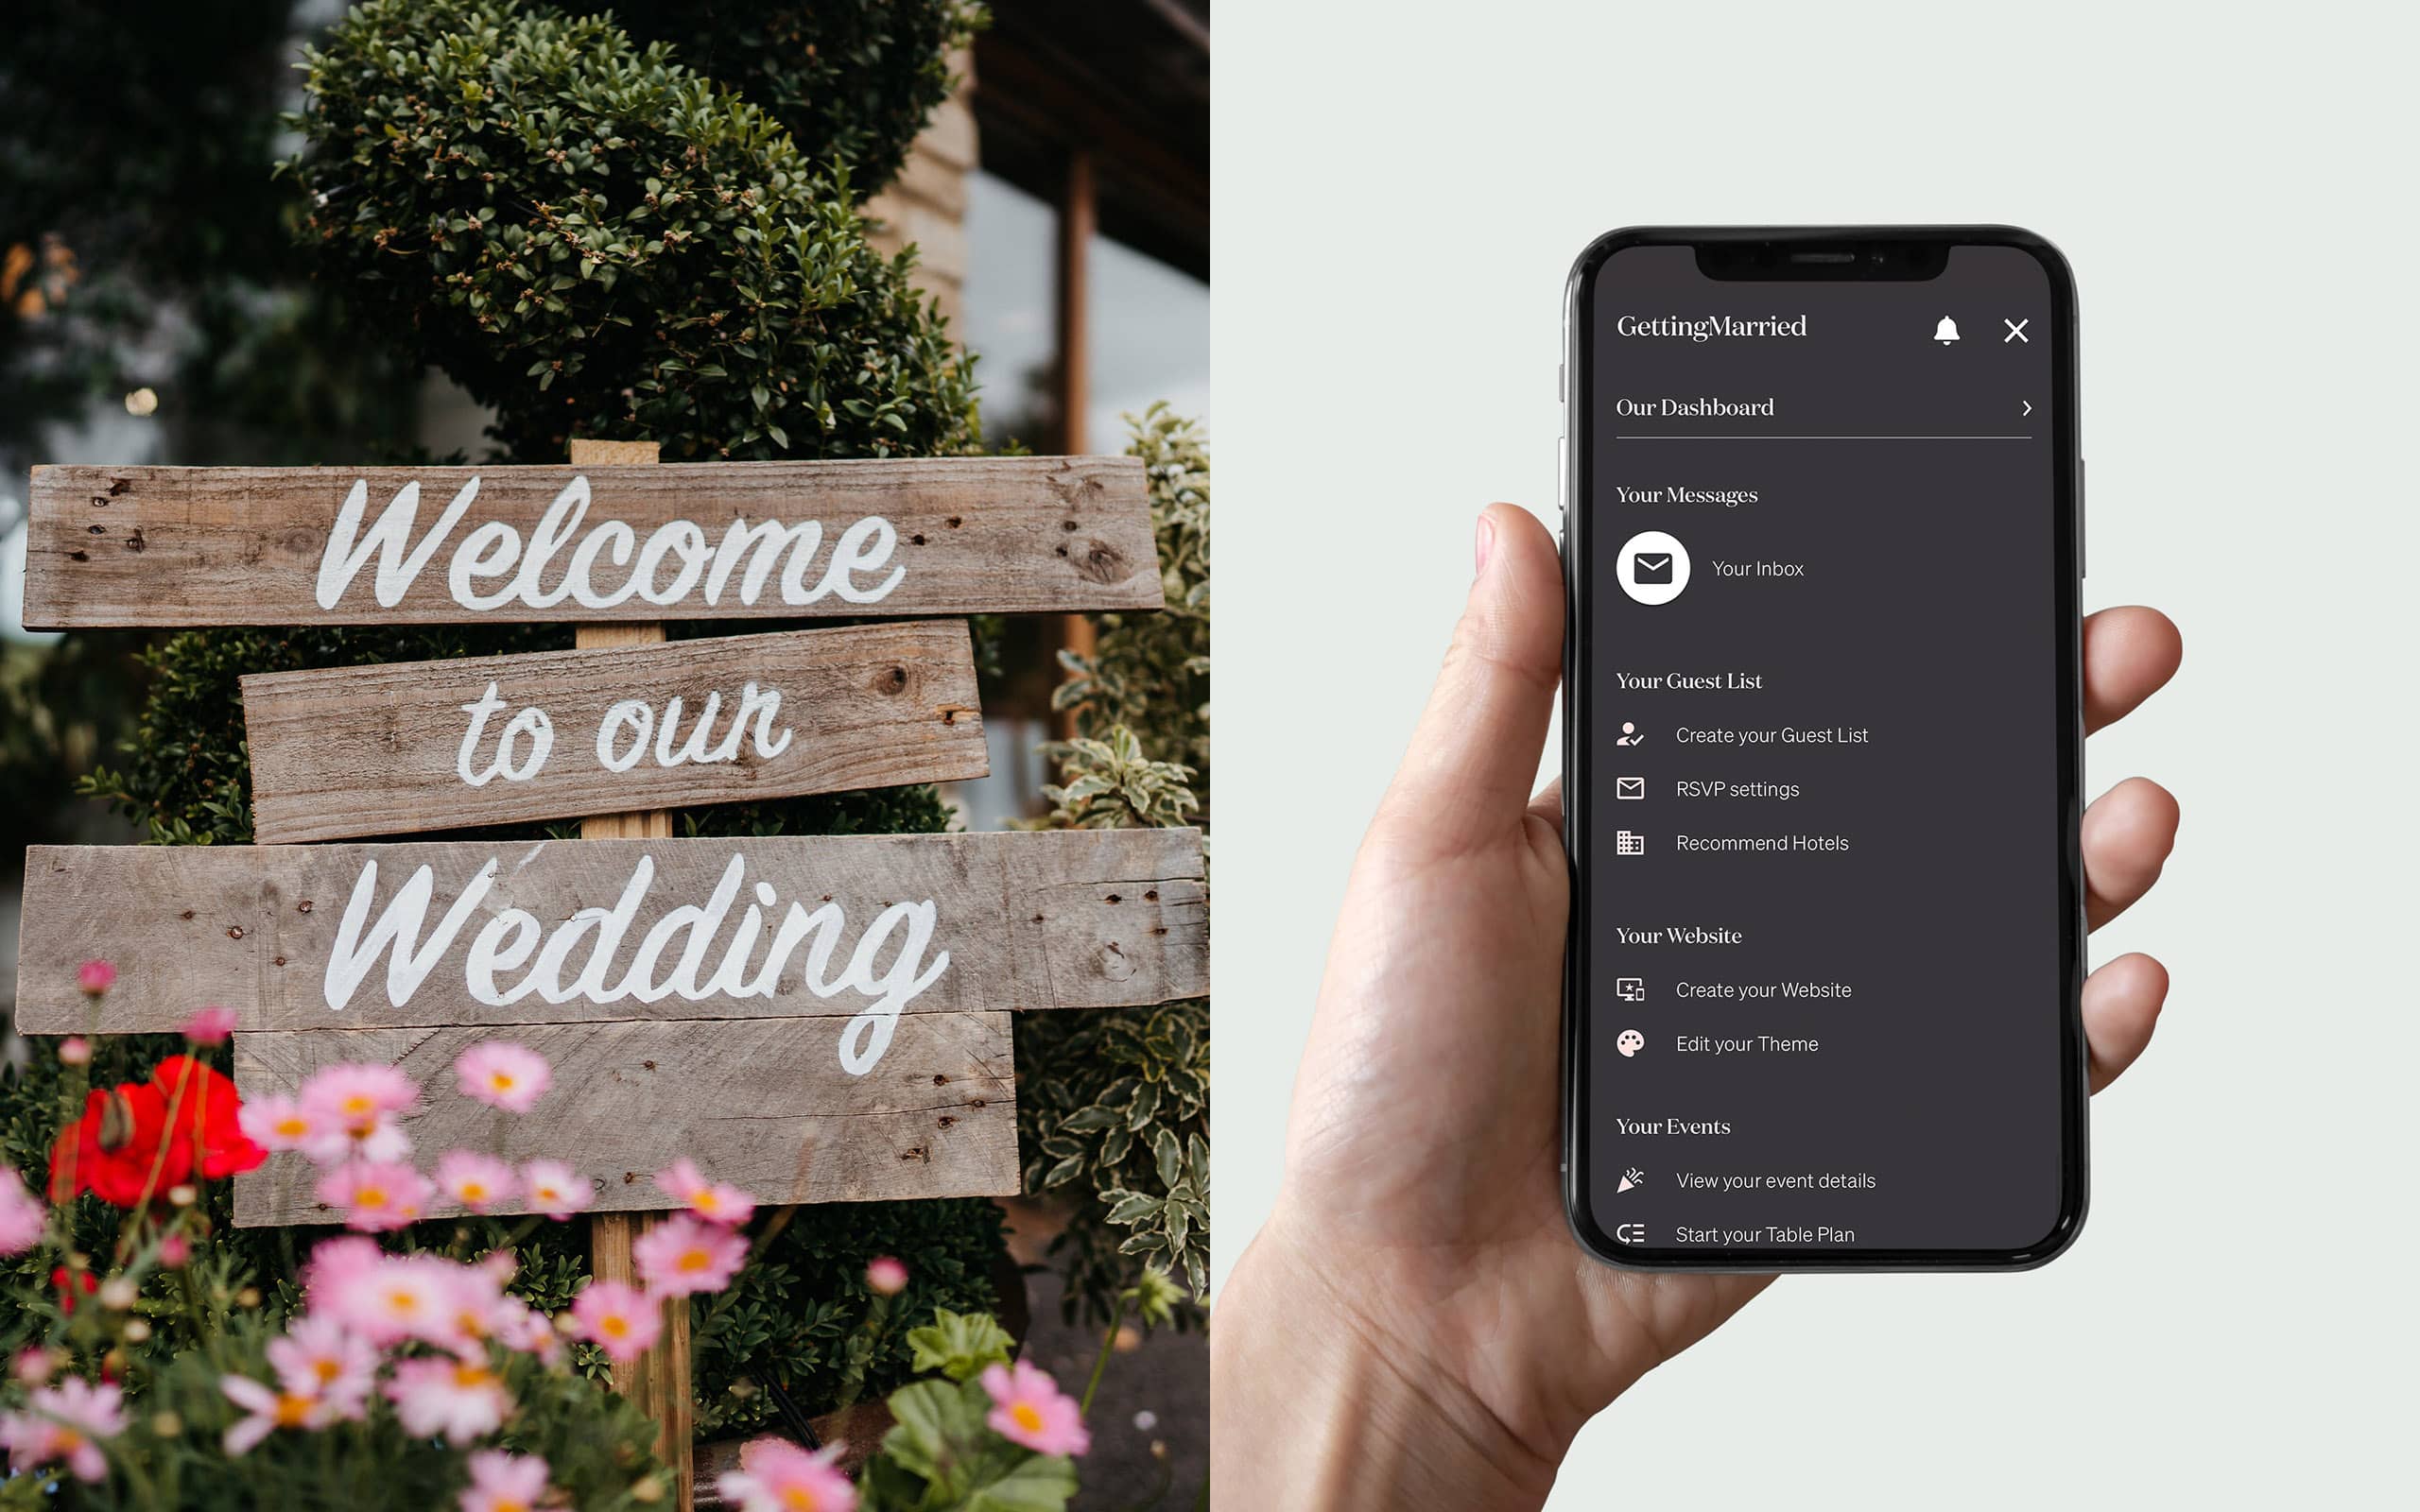 A wedding welcome sign coupled with a screen shot of the GettingMarried app on an iPhone